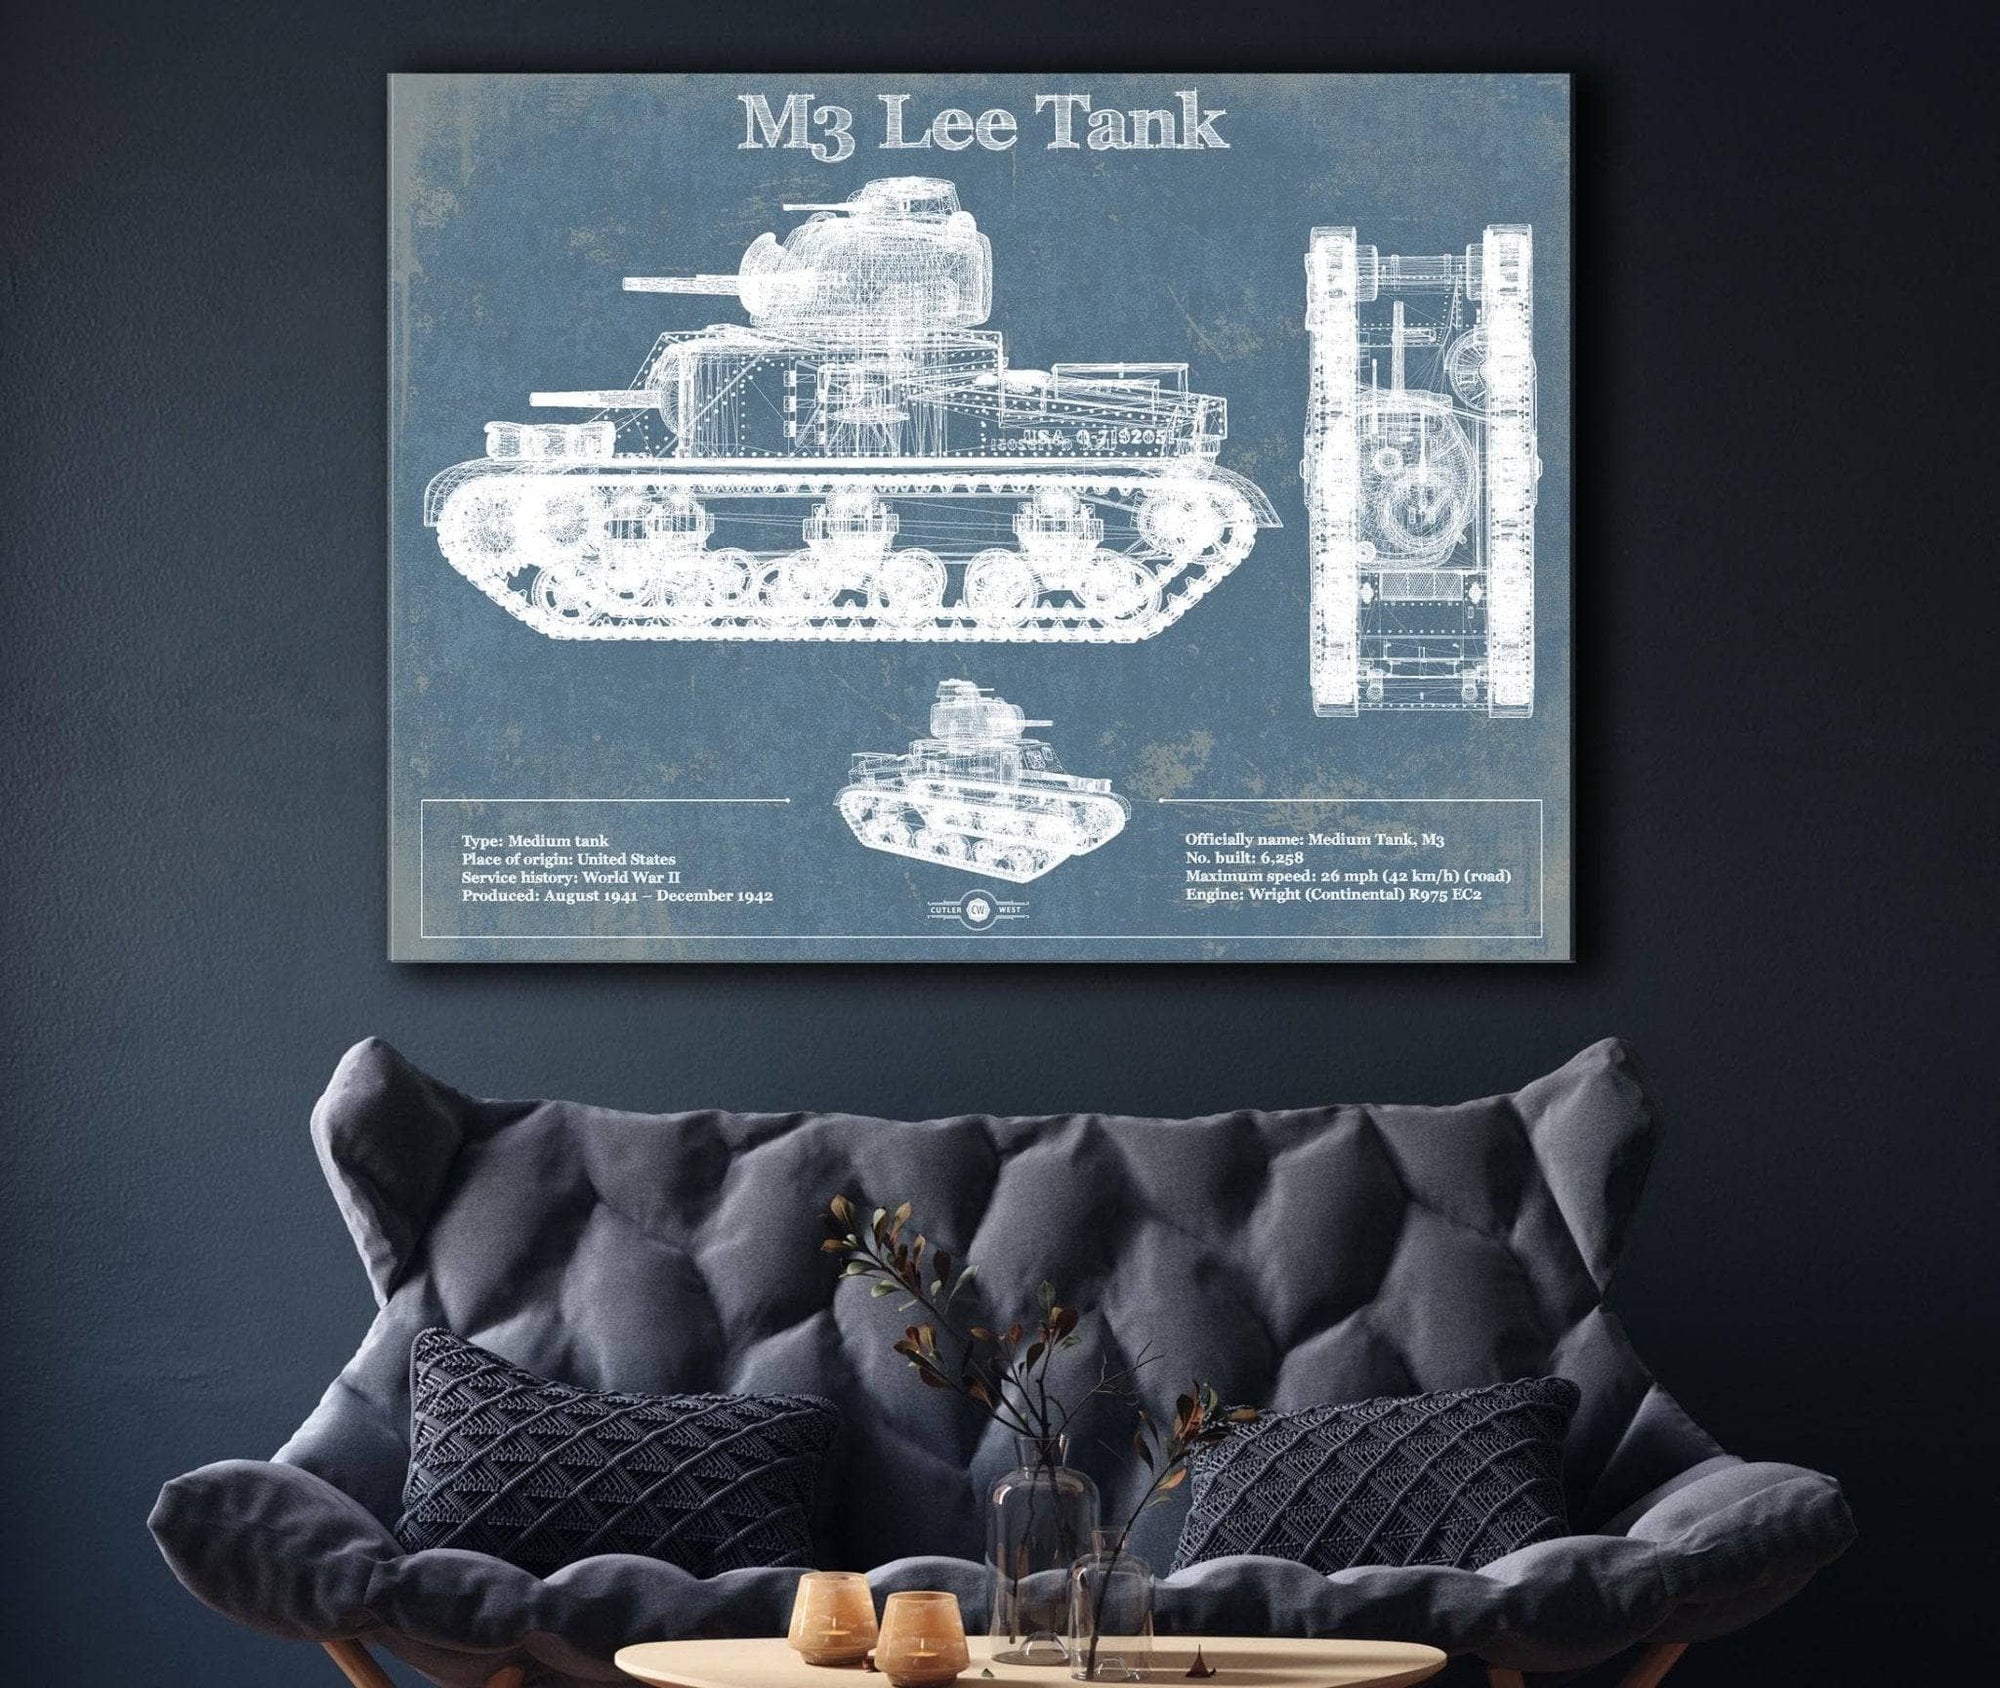 Cutler West Military Weapons Collection Medium Tank, M3 Lee Vintage Blueprint Print